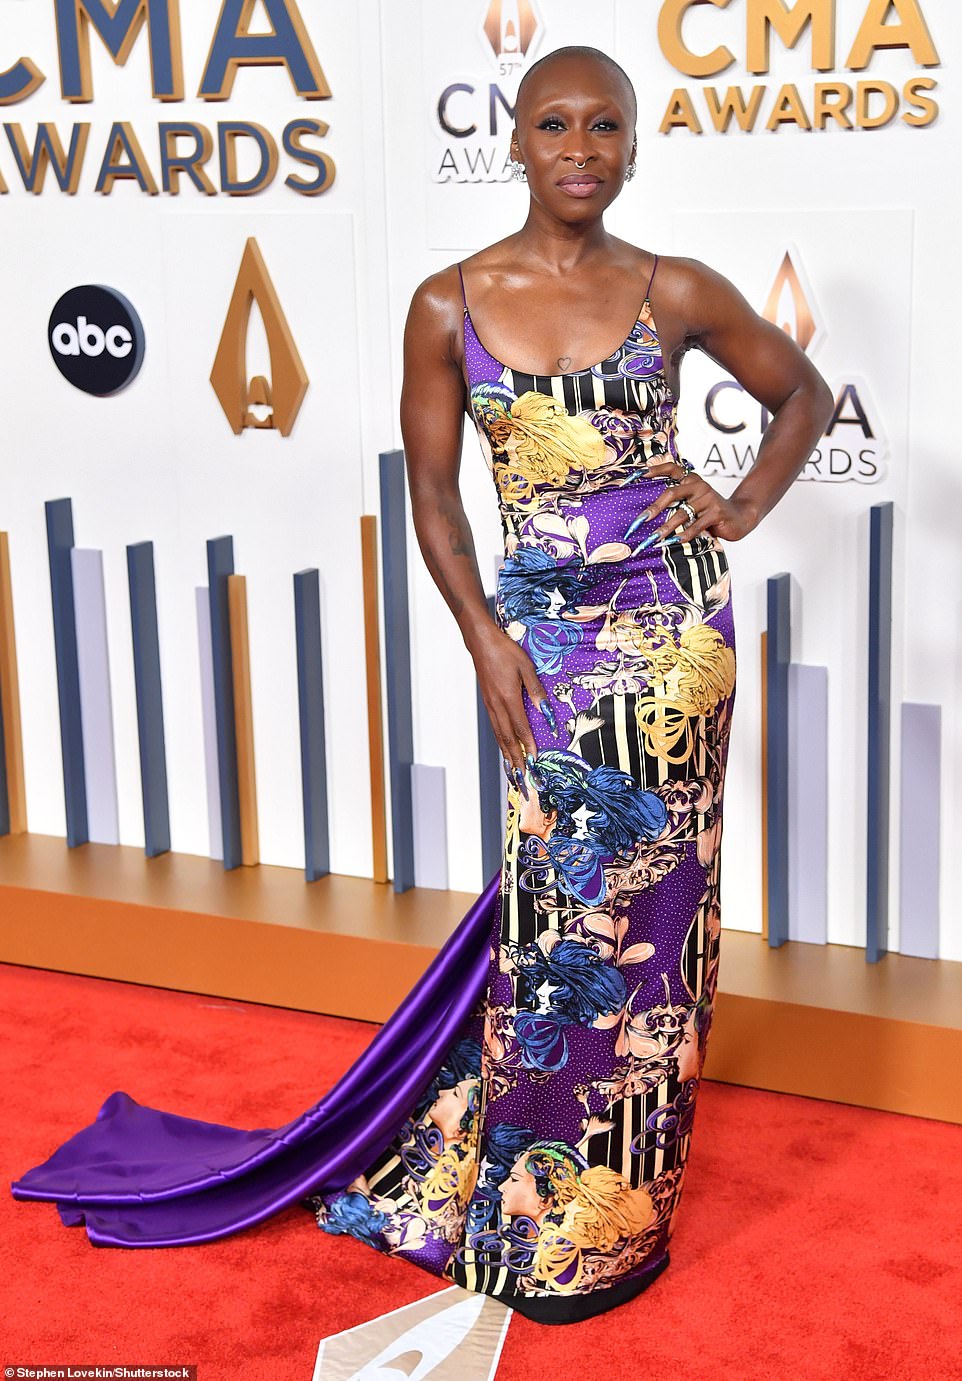 Making a statement: Cynthia Erivo wore a purple patterned dress with a coordinating train